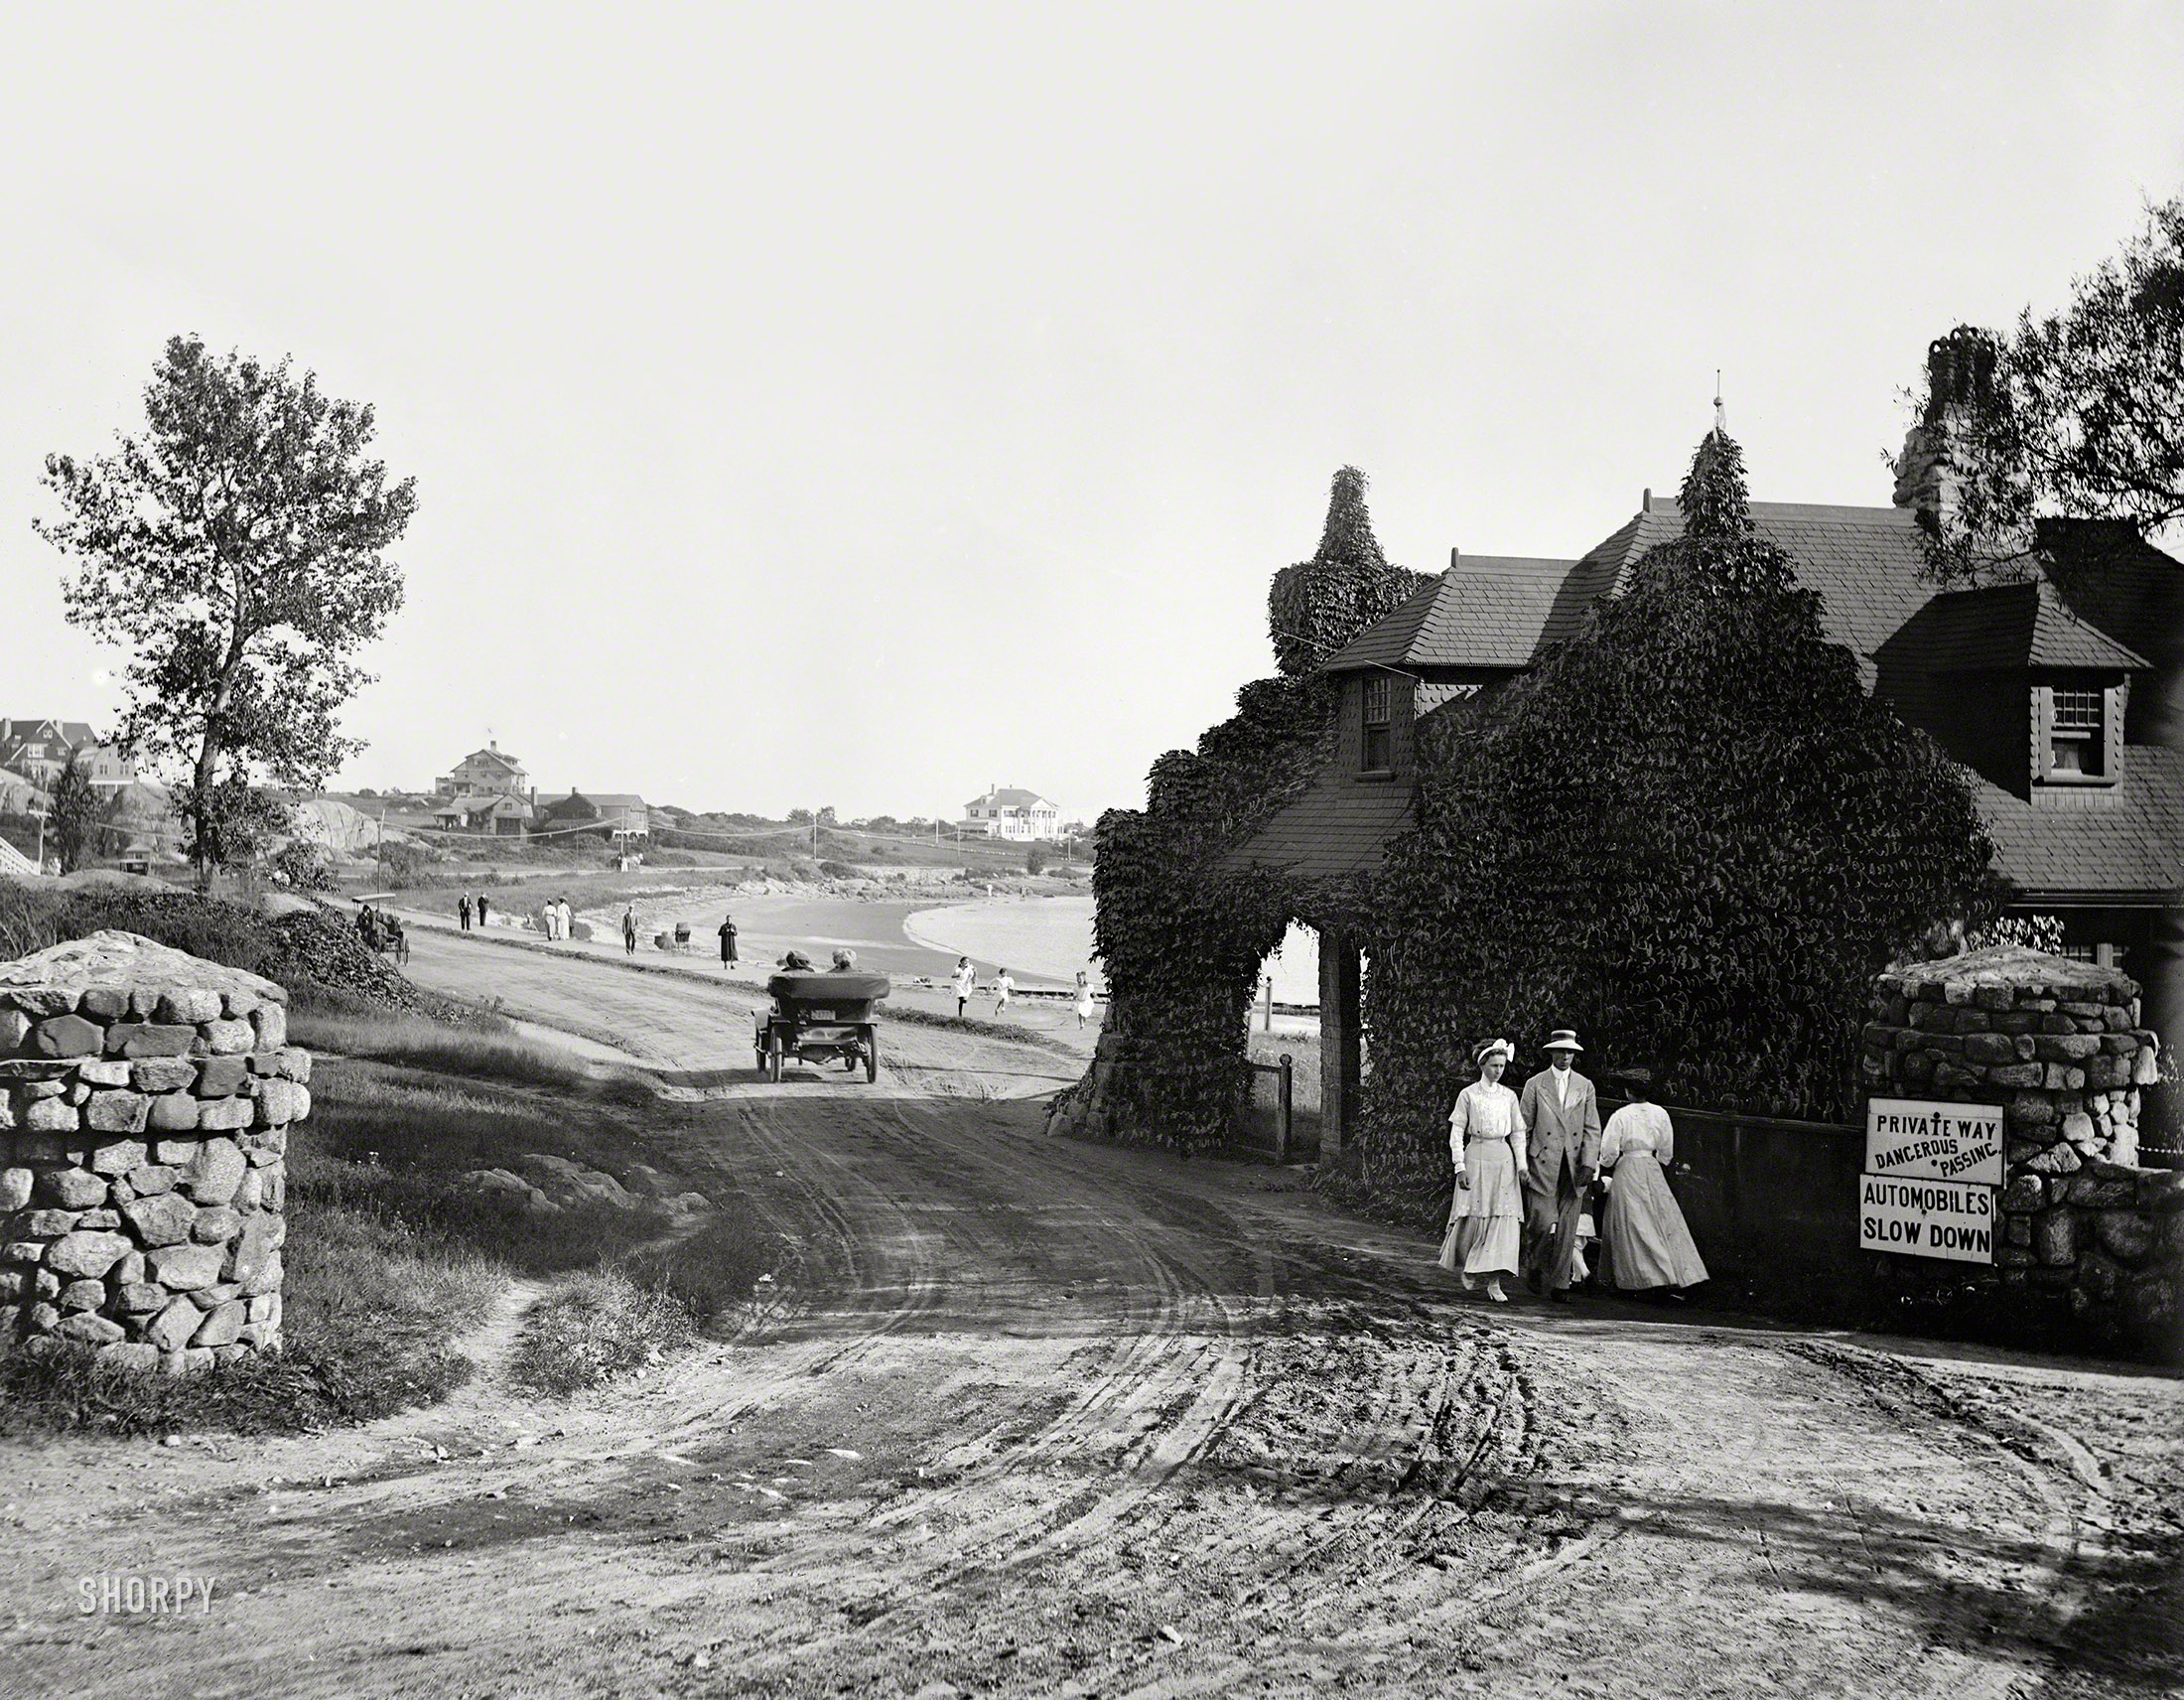 Circa 1910. "Gate lodge and Niles Beach, East Gloucester, Mass." 8x10 inch dry plate glass negative, Detroit Publishing Company. View full size.